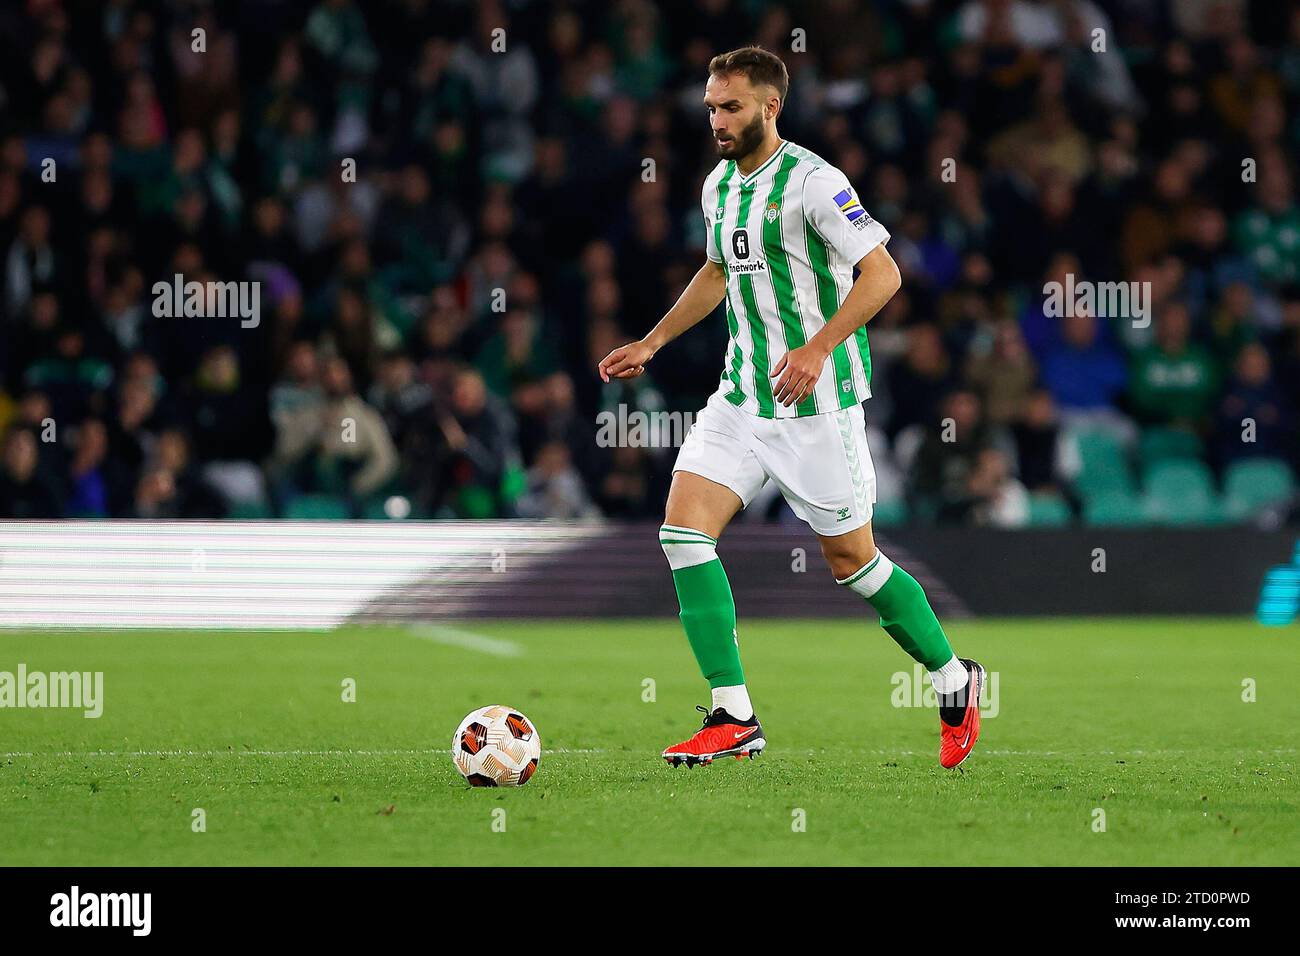 Seville, Spain. 14th December 2023. German Pezzella (6) of Real Betis seen during the UEFA Europa League match between Real Betis and Rangers at the Estadio Benito Villamarin in Seville. (Photo credit: Gonzales Photo - Andres Gongora). Credit: Gonzales Photo/Alamy Live News Stock Photo